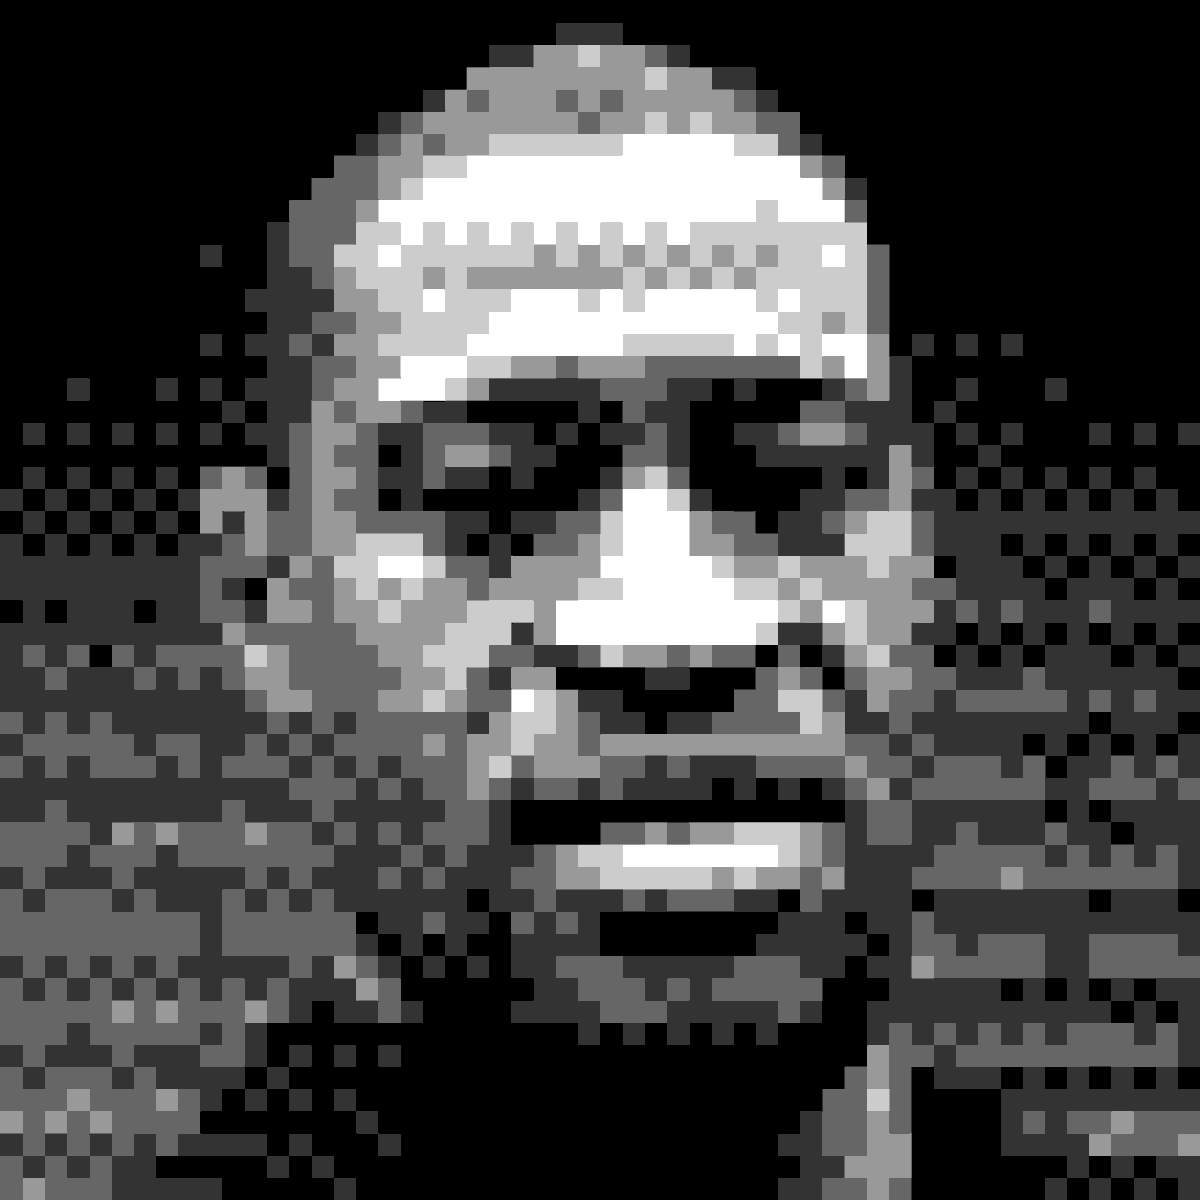 A low resolution photograph of George Floyd, a Black man, standing in front of a brick wall. The photo is 54 square pixels, each containing one of six shades of gray.